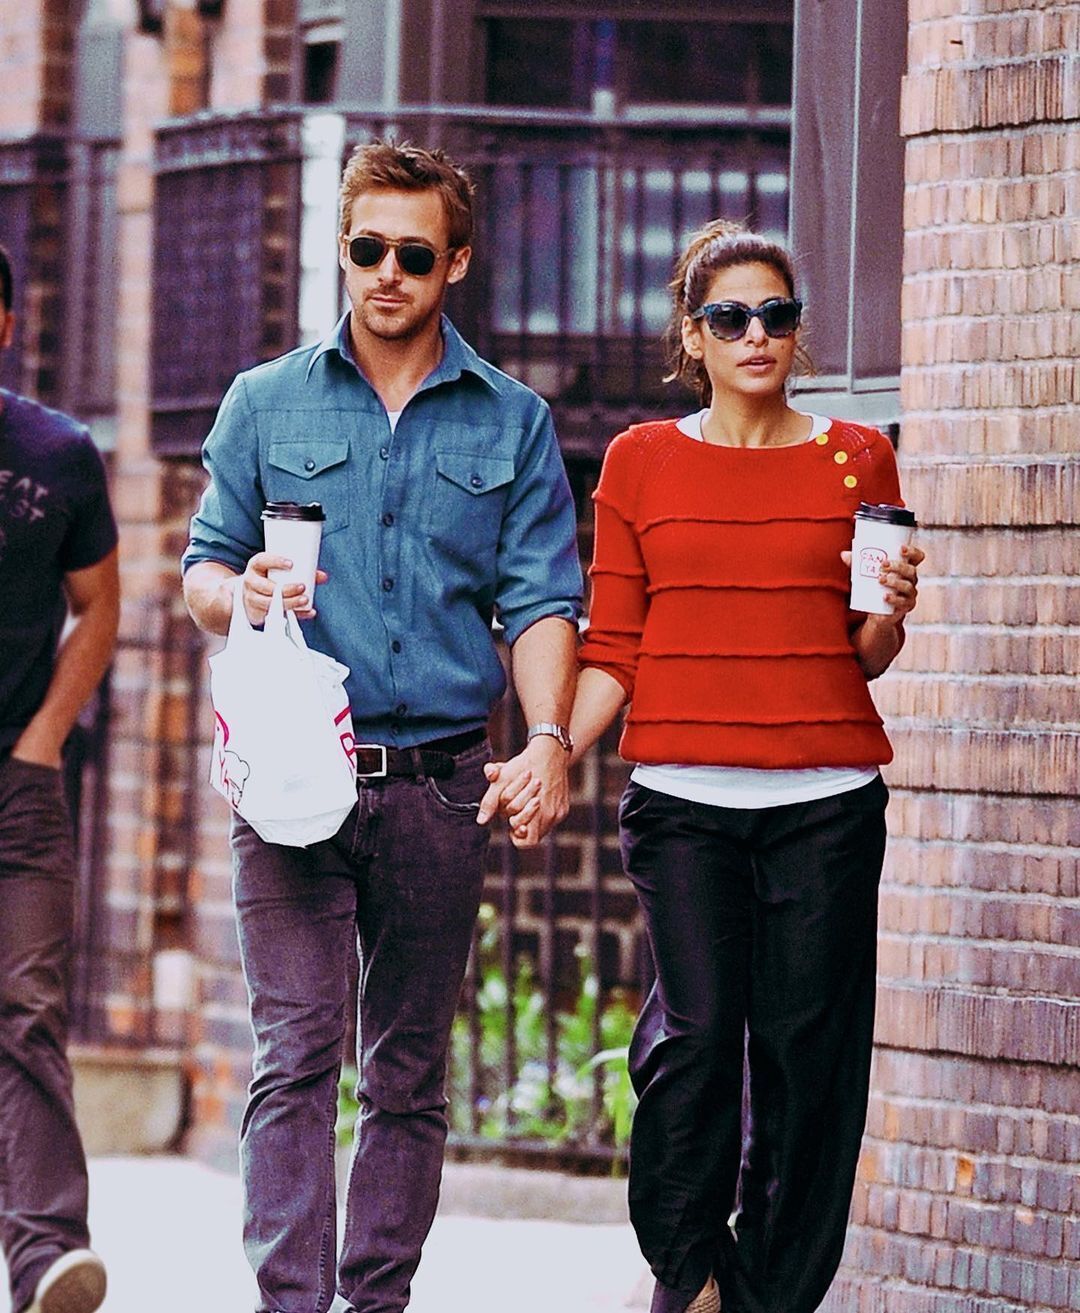 He always says she's beautiful: what is the secret of the strong relationship between Ryan Gosling and Eva Mendes, which the actor himself calls ''a dream''